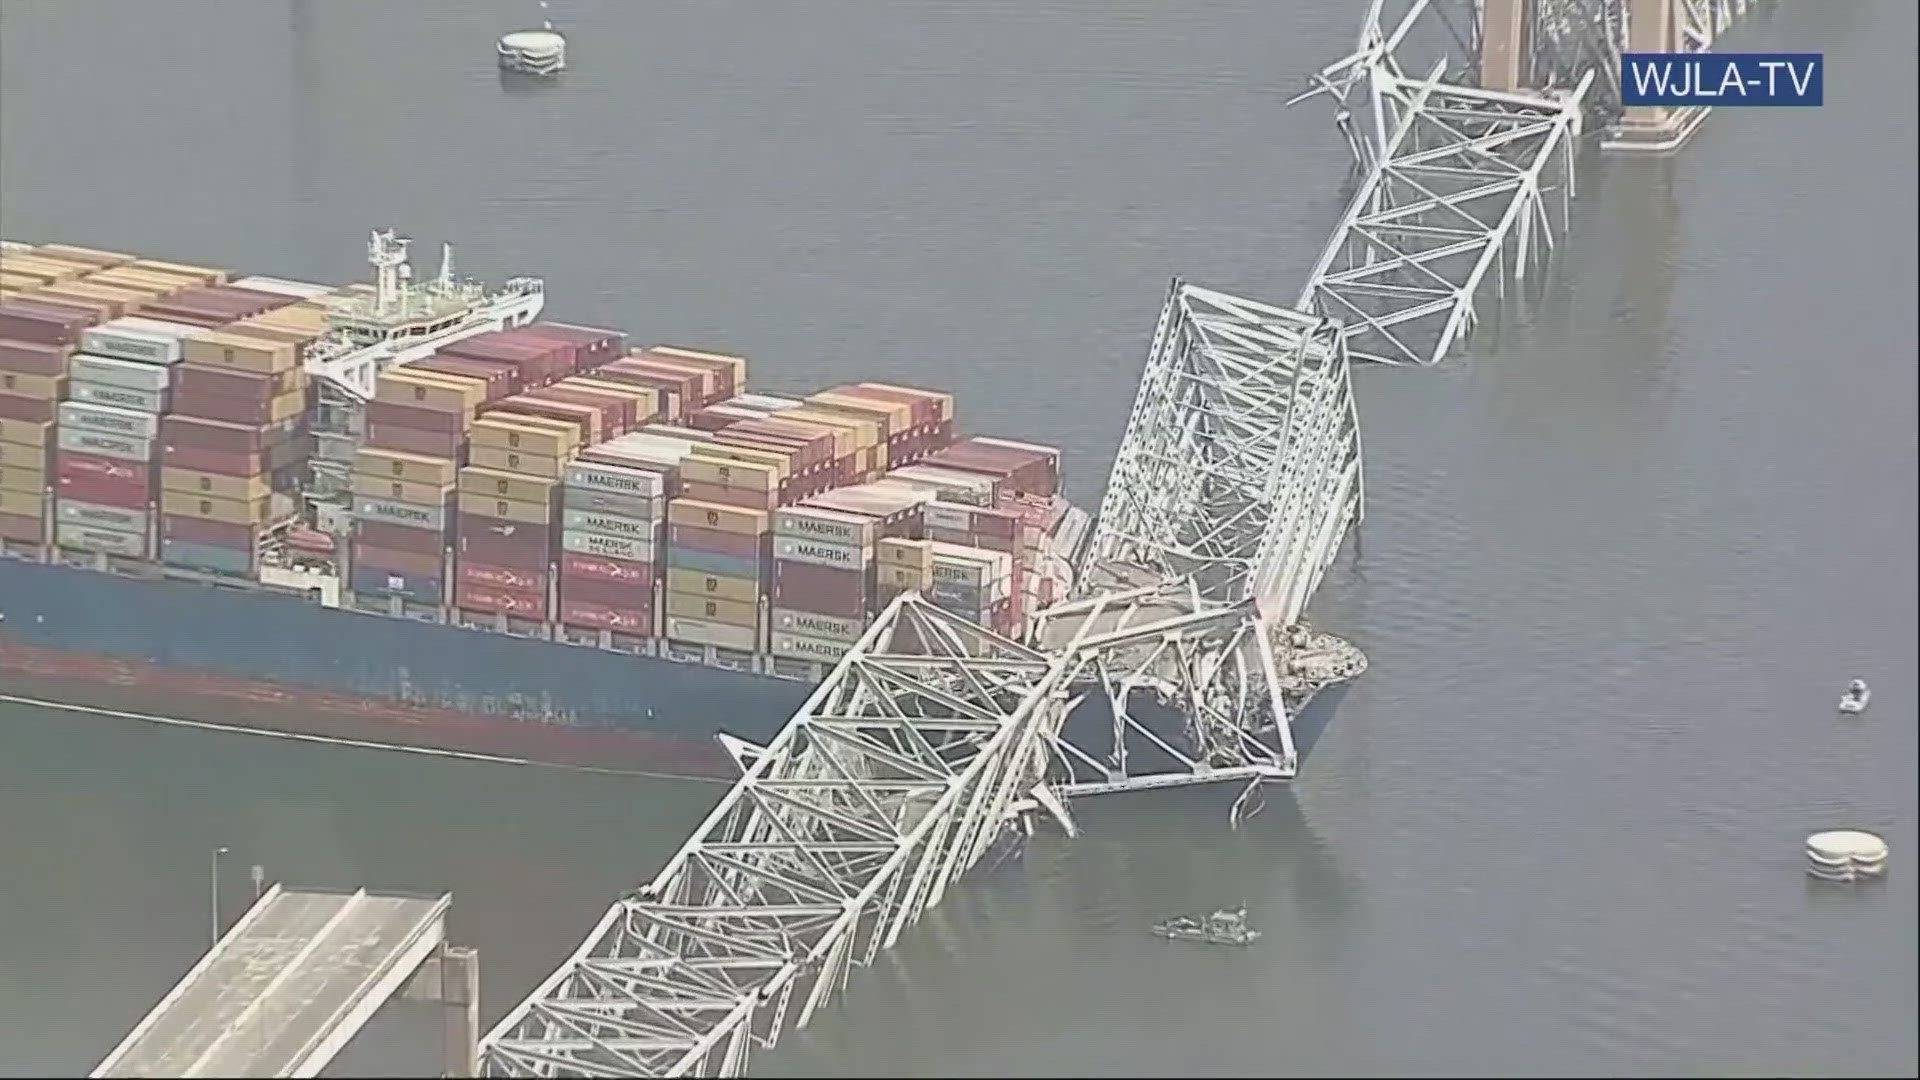 A ship slammed into the Francis Scott Key Bridge on Tuesday morning, causing it to collapse.